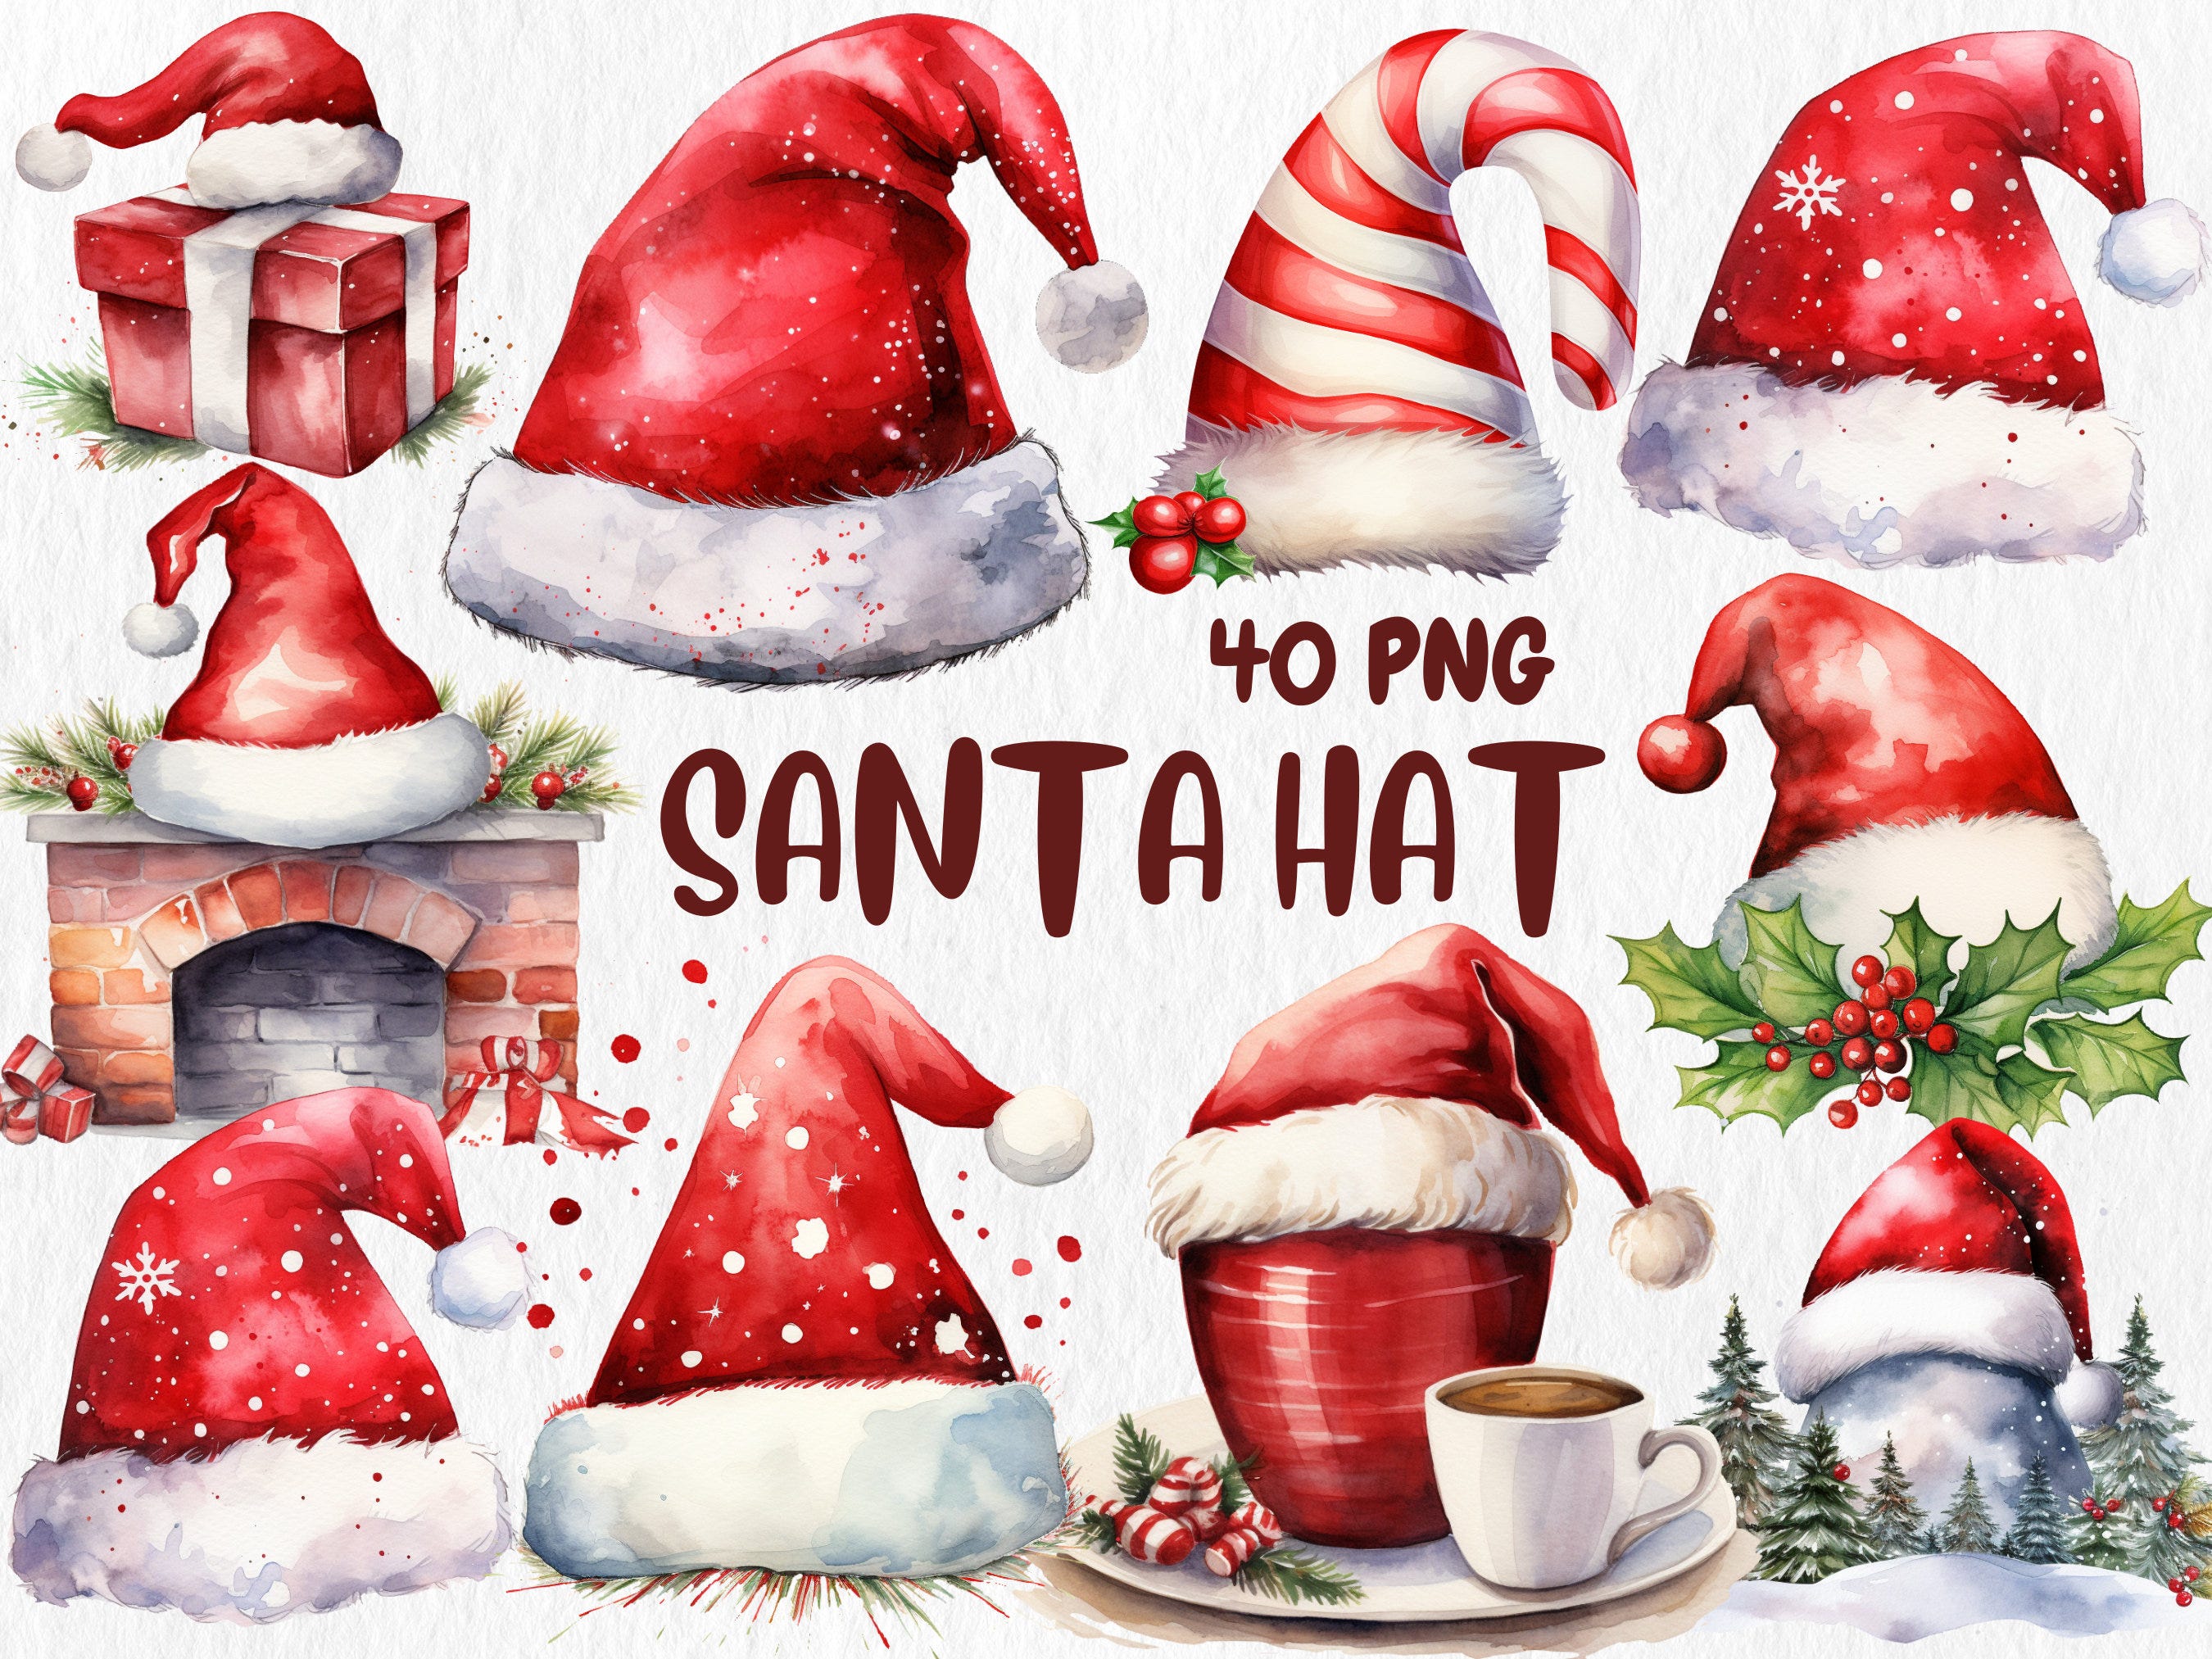 Watercolor Santa Hat Clipart | Xmas, Winter, Christmas Decoration, Santa Claus Hat Illustrations | Instant Download for Commercial Use